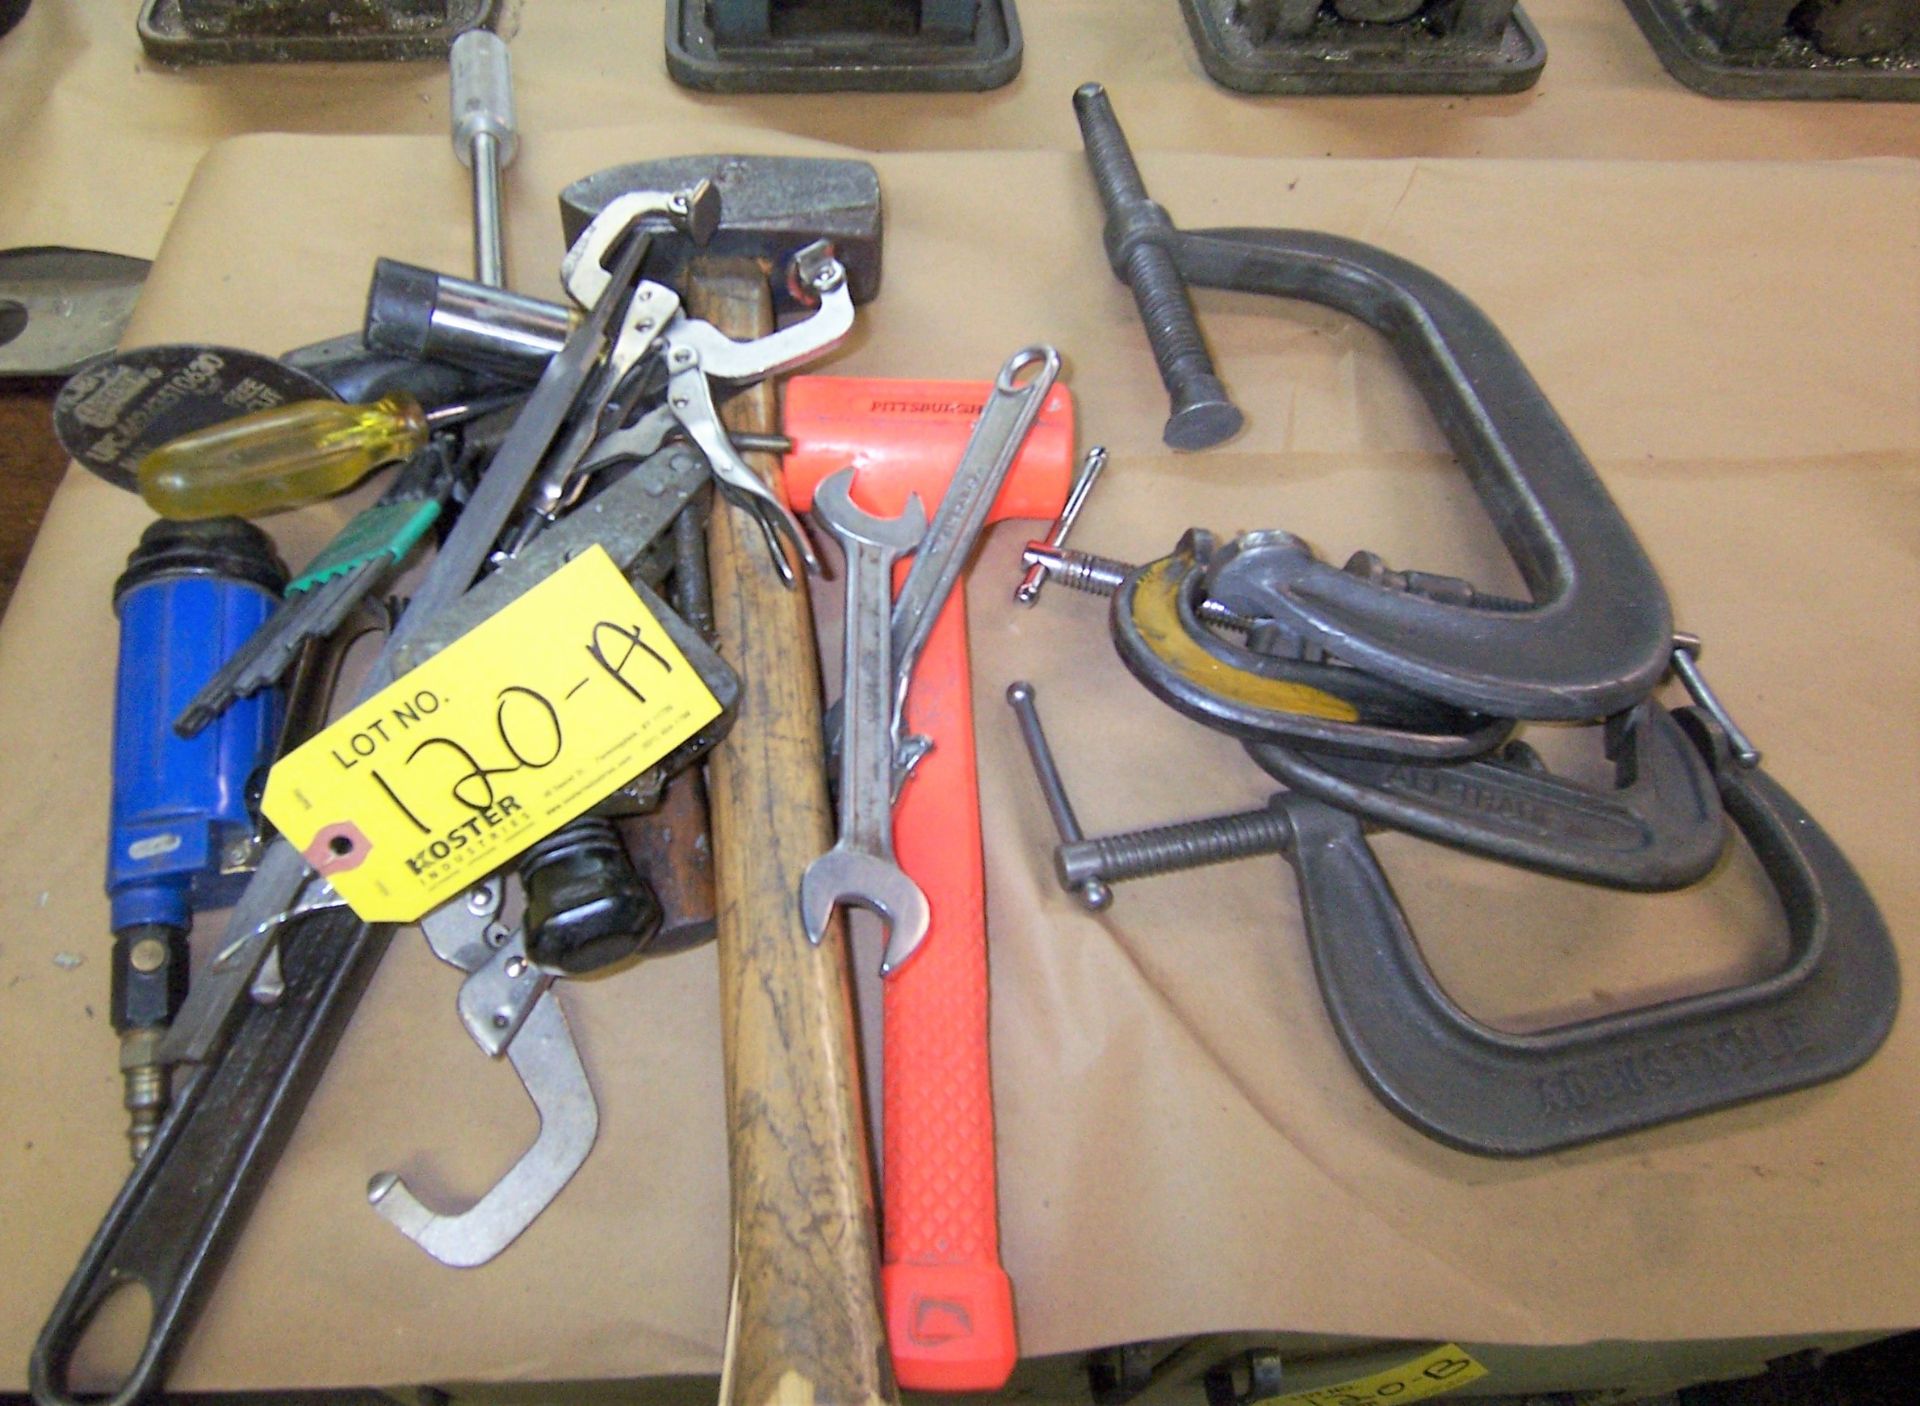 LOT OF HAND TOOLS & C-CLAMPS